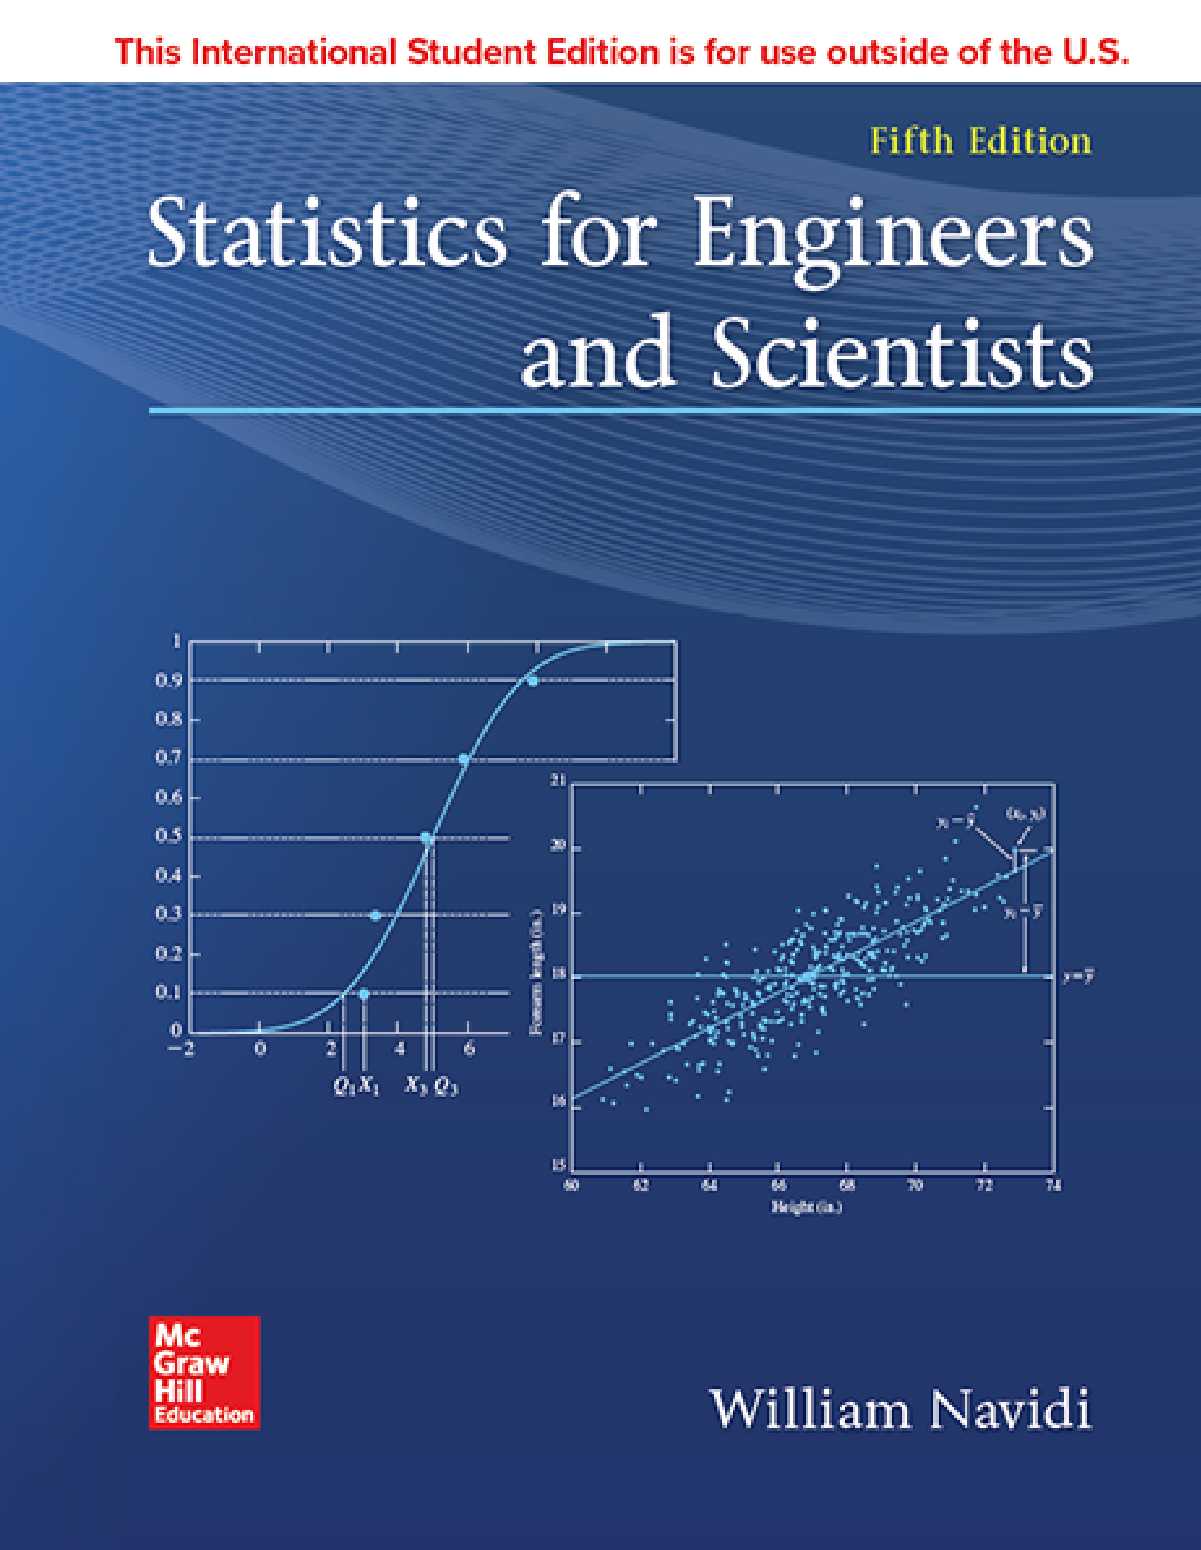 Statistics for Engineers and Scientists, 5th Edition